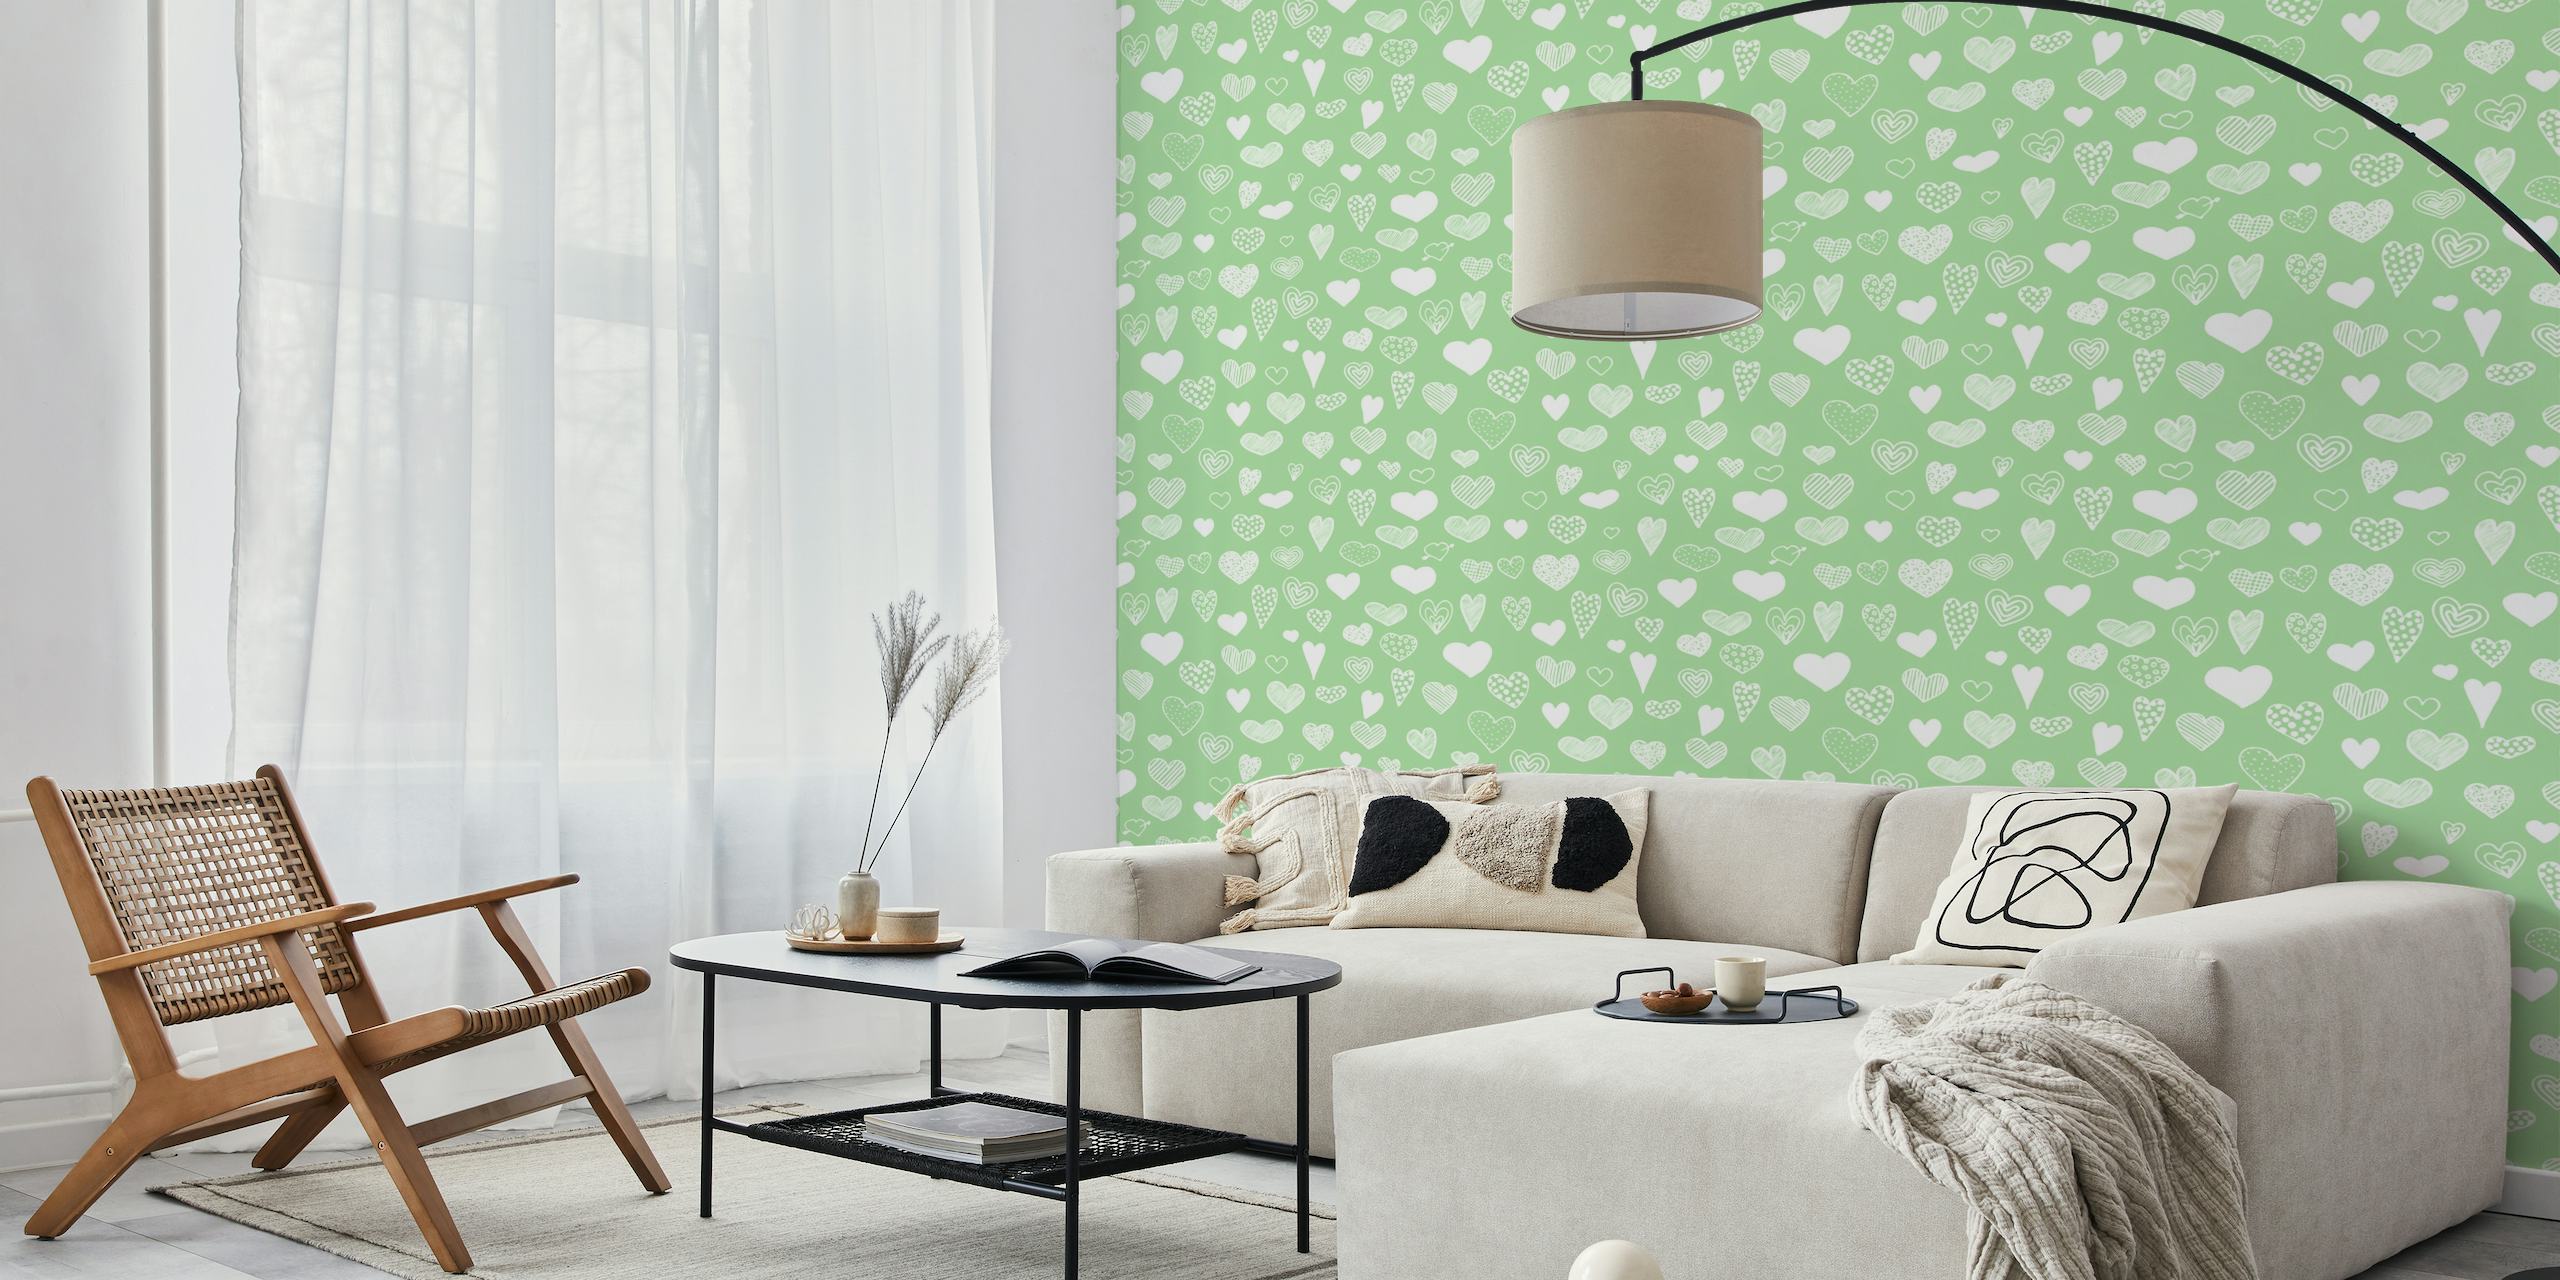 Heart Doodles in Mint Green wall mural with hand-drawn heart patterns